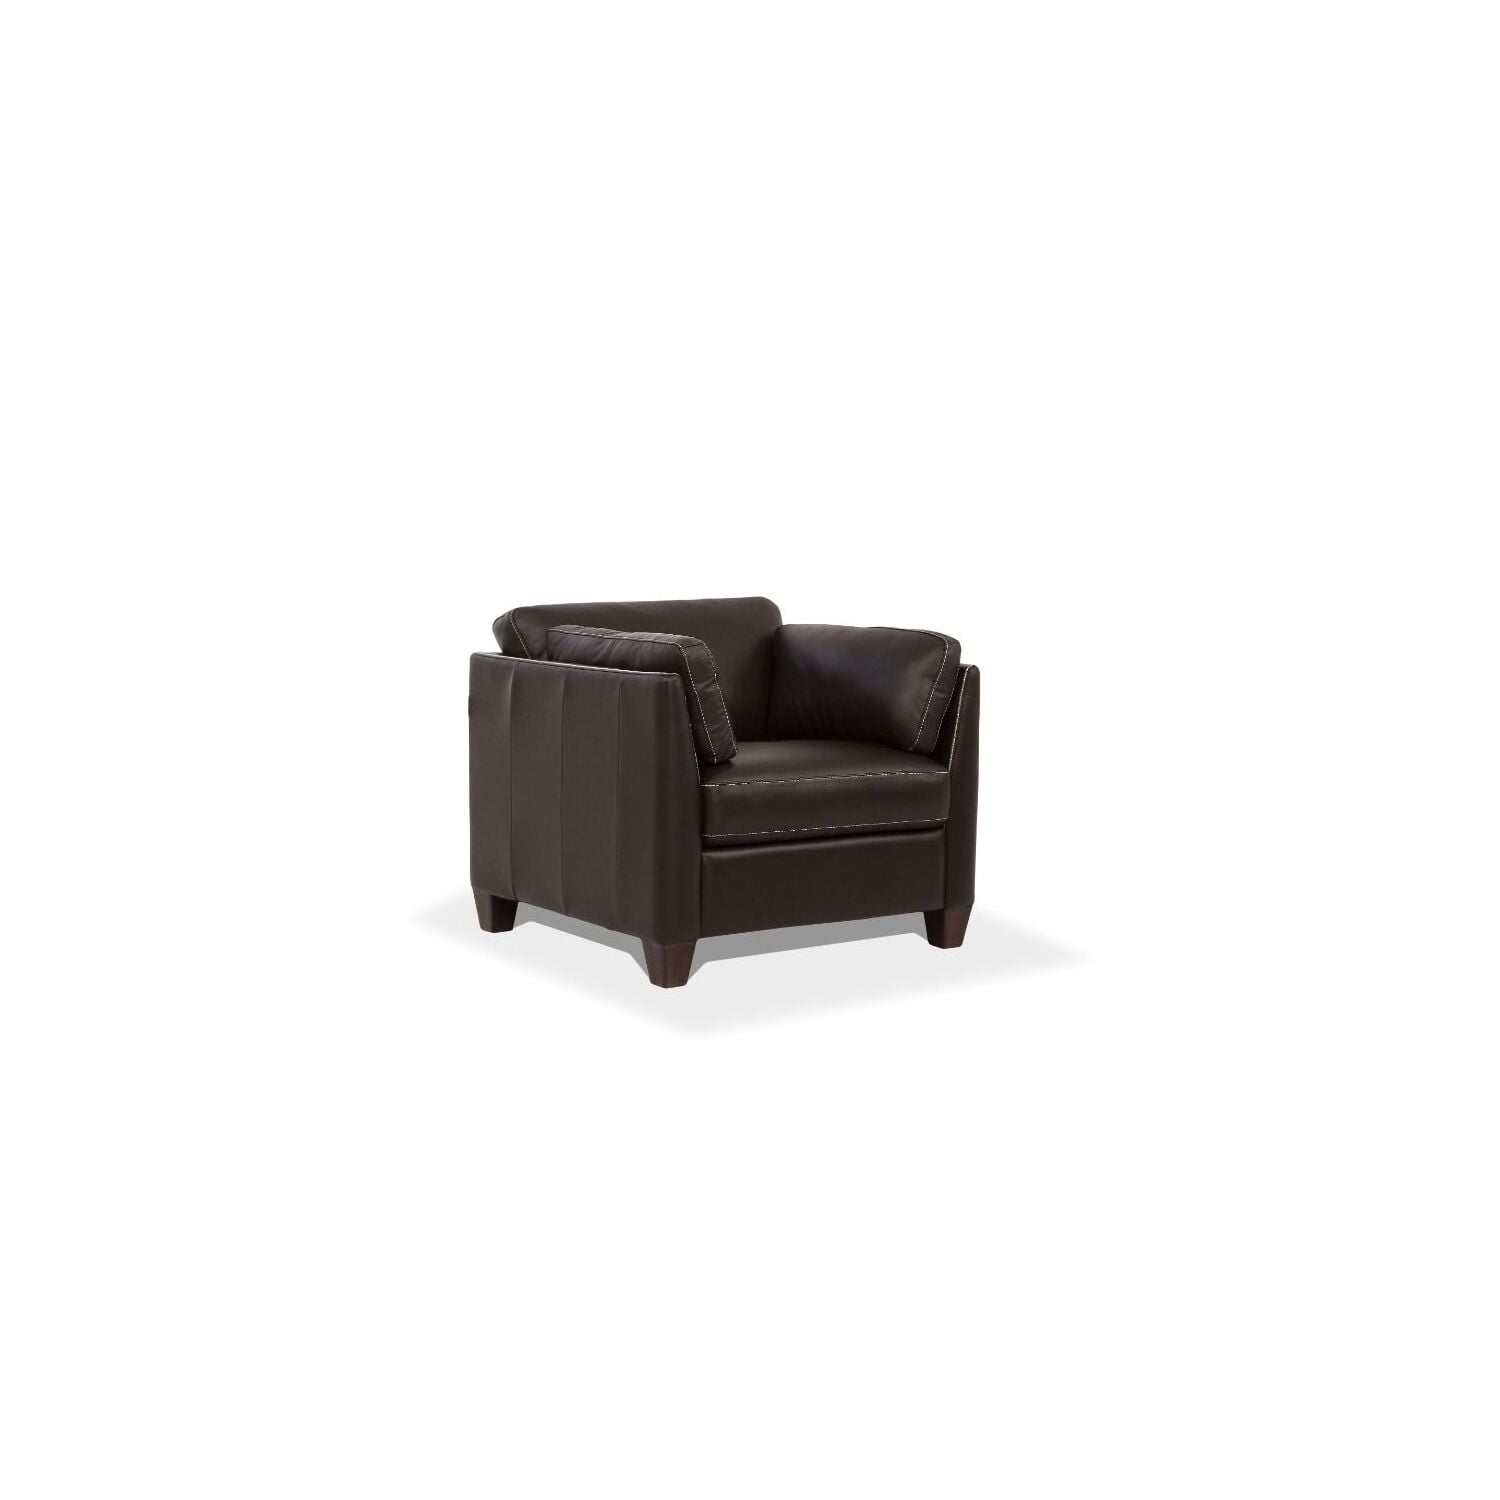 Picture of Acme Furniture 55012 36 x 34 x 31 in. Matias Accent Chair, Chocolate Leather